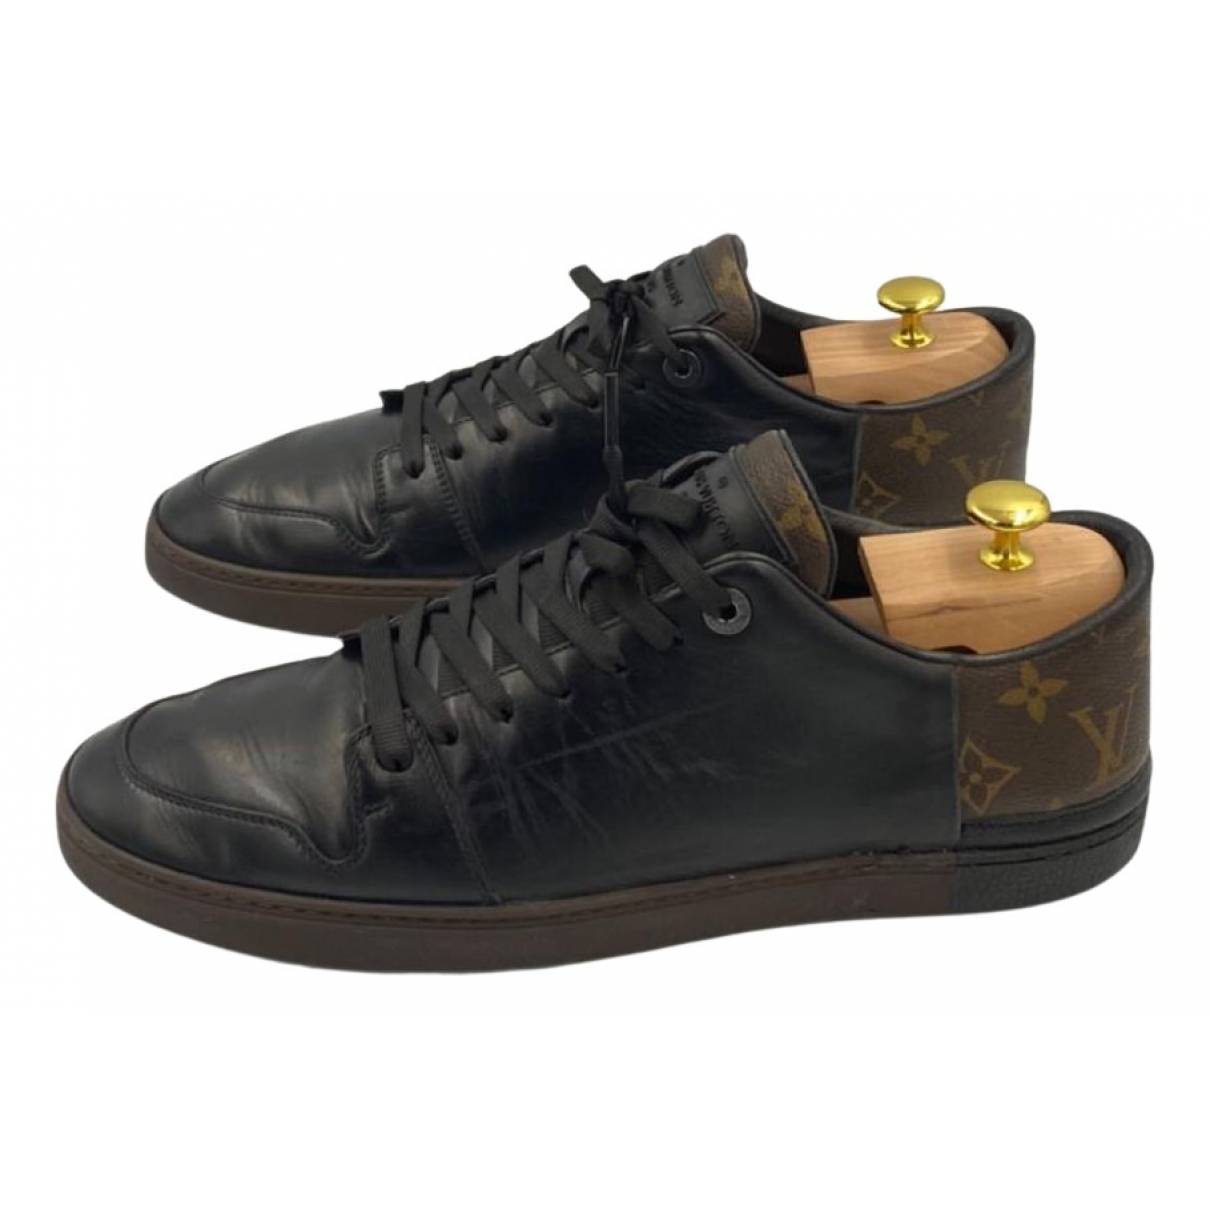 Leather trainers Louis Vuitton Black size 8.5 UK in Leather - 22353373